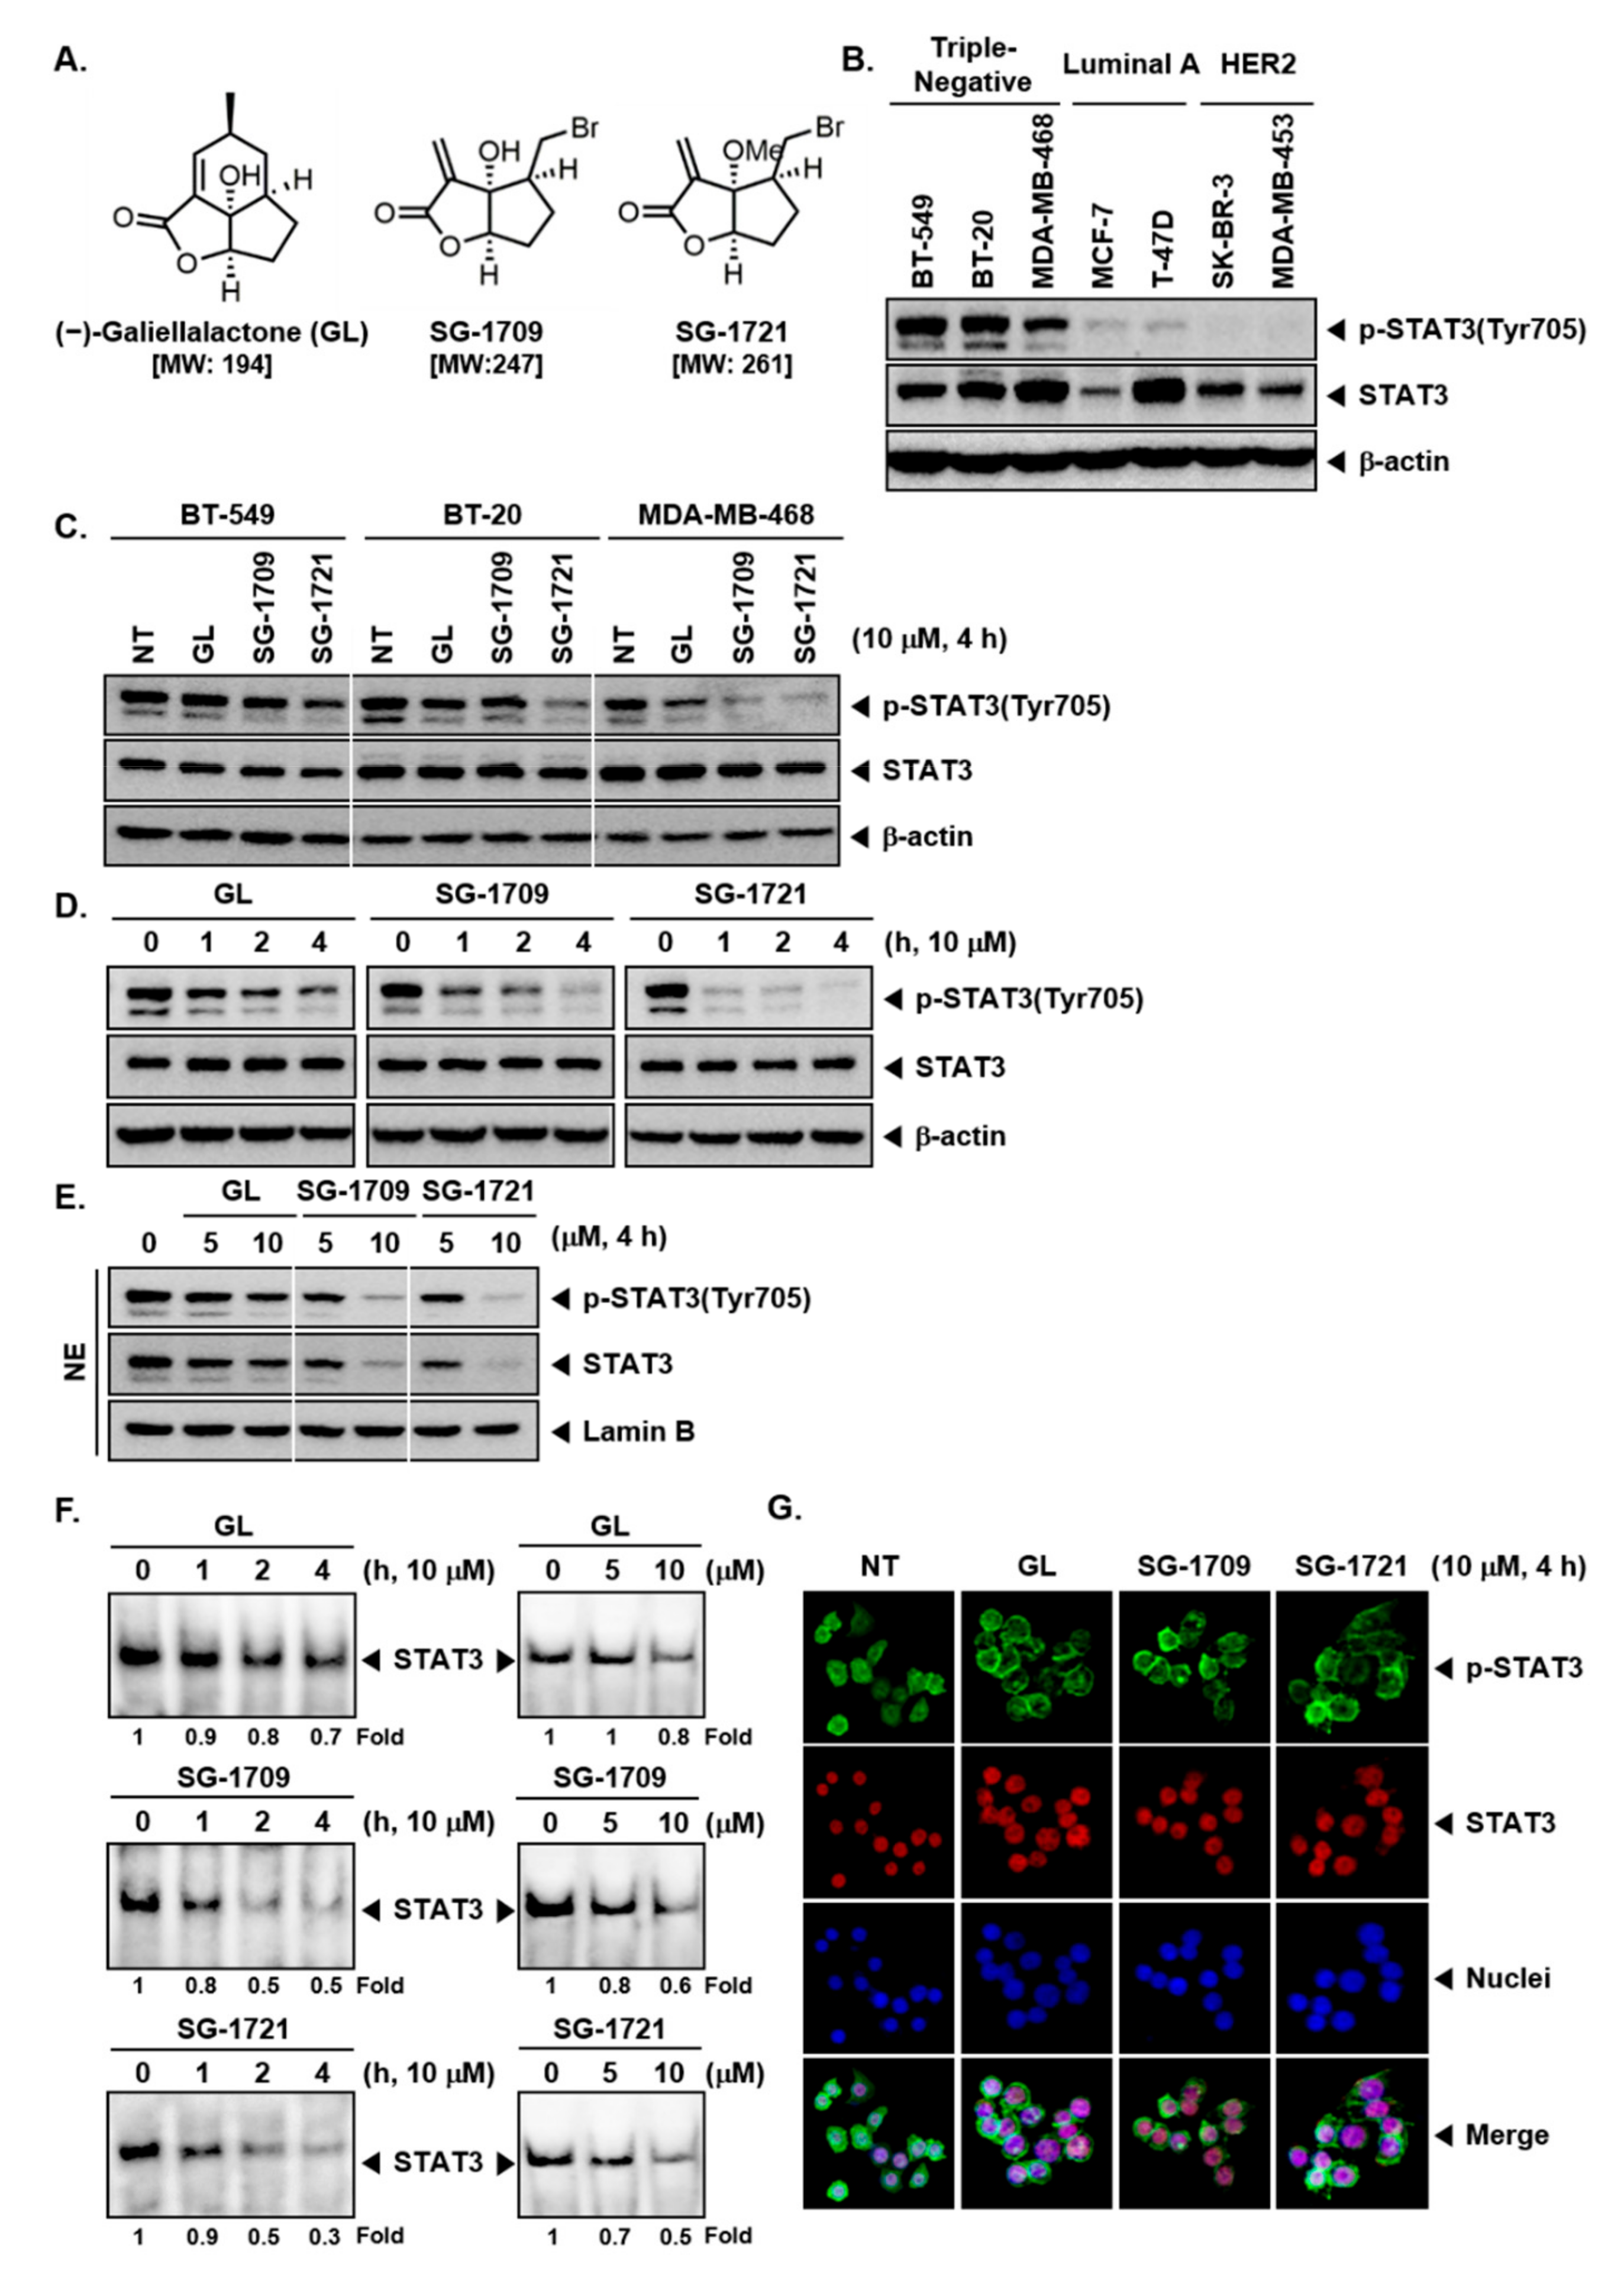 Biomolecules Free Full Text Novel Galiellalactone Analogues Can Target Stat3 Phosphorylation And Cause Apoptosis In Triple Negative Breast Cancer Html